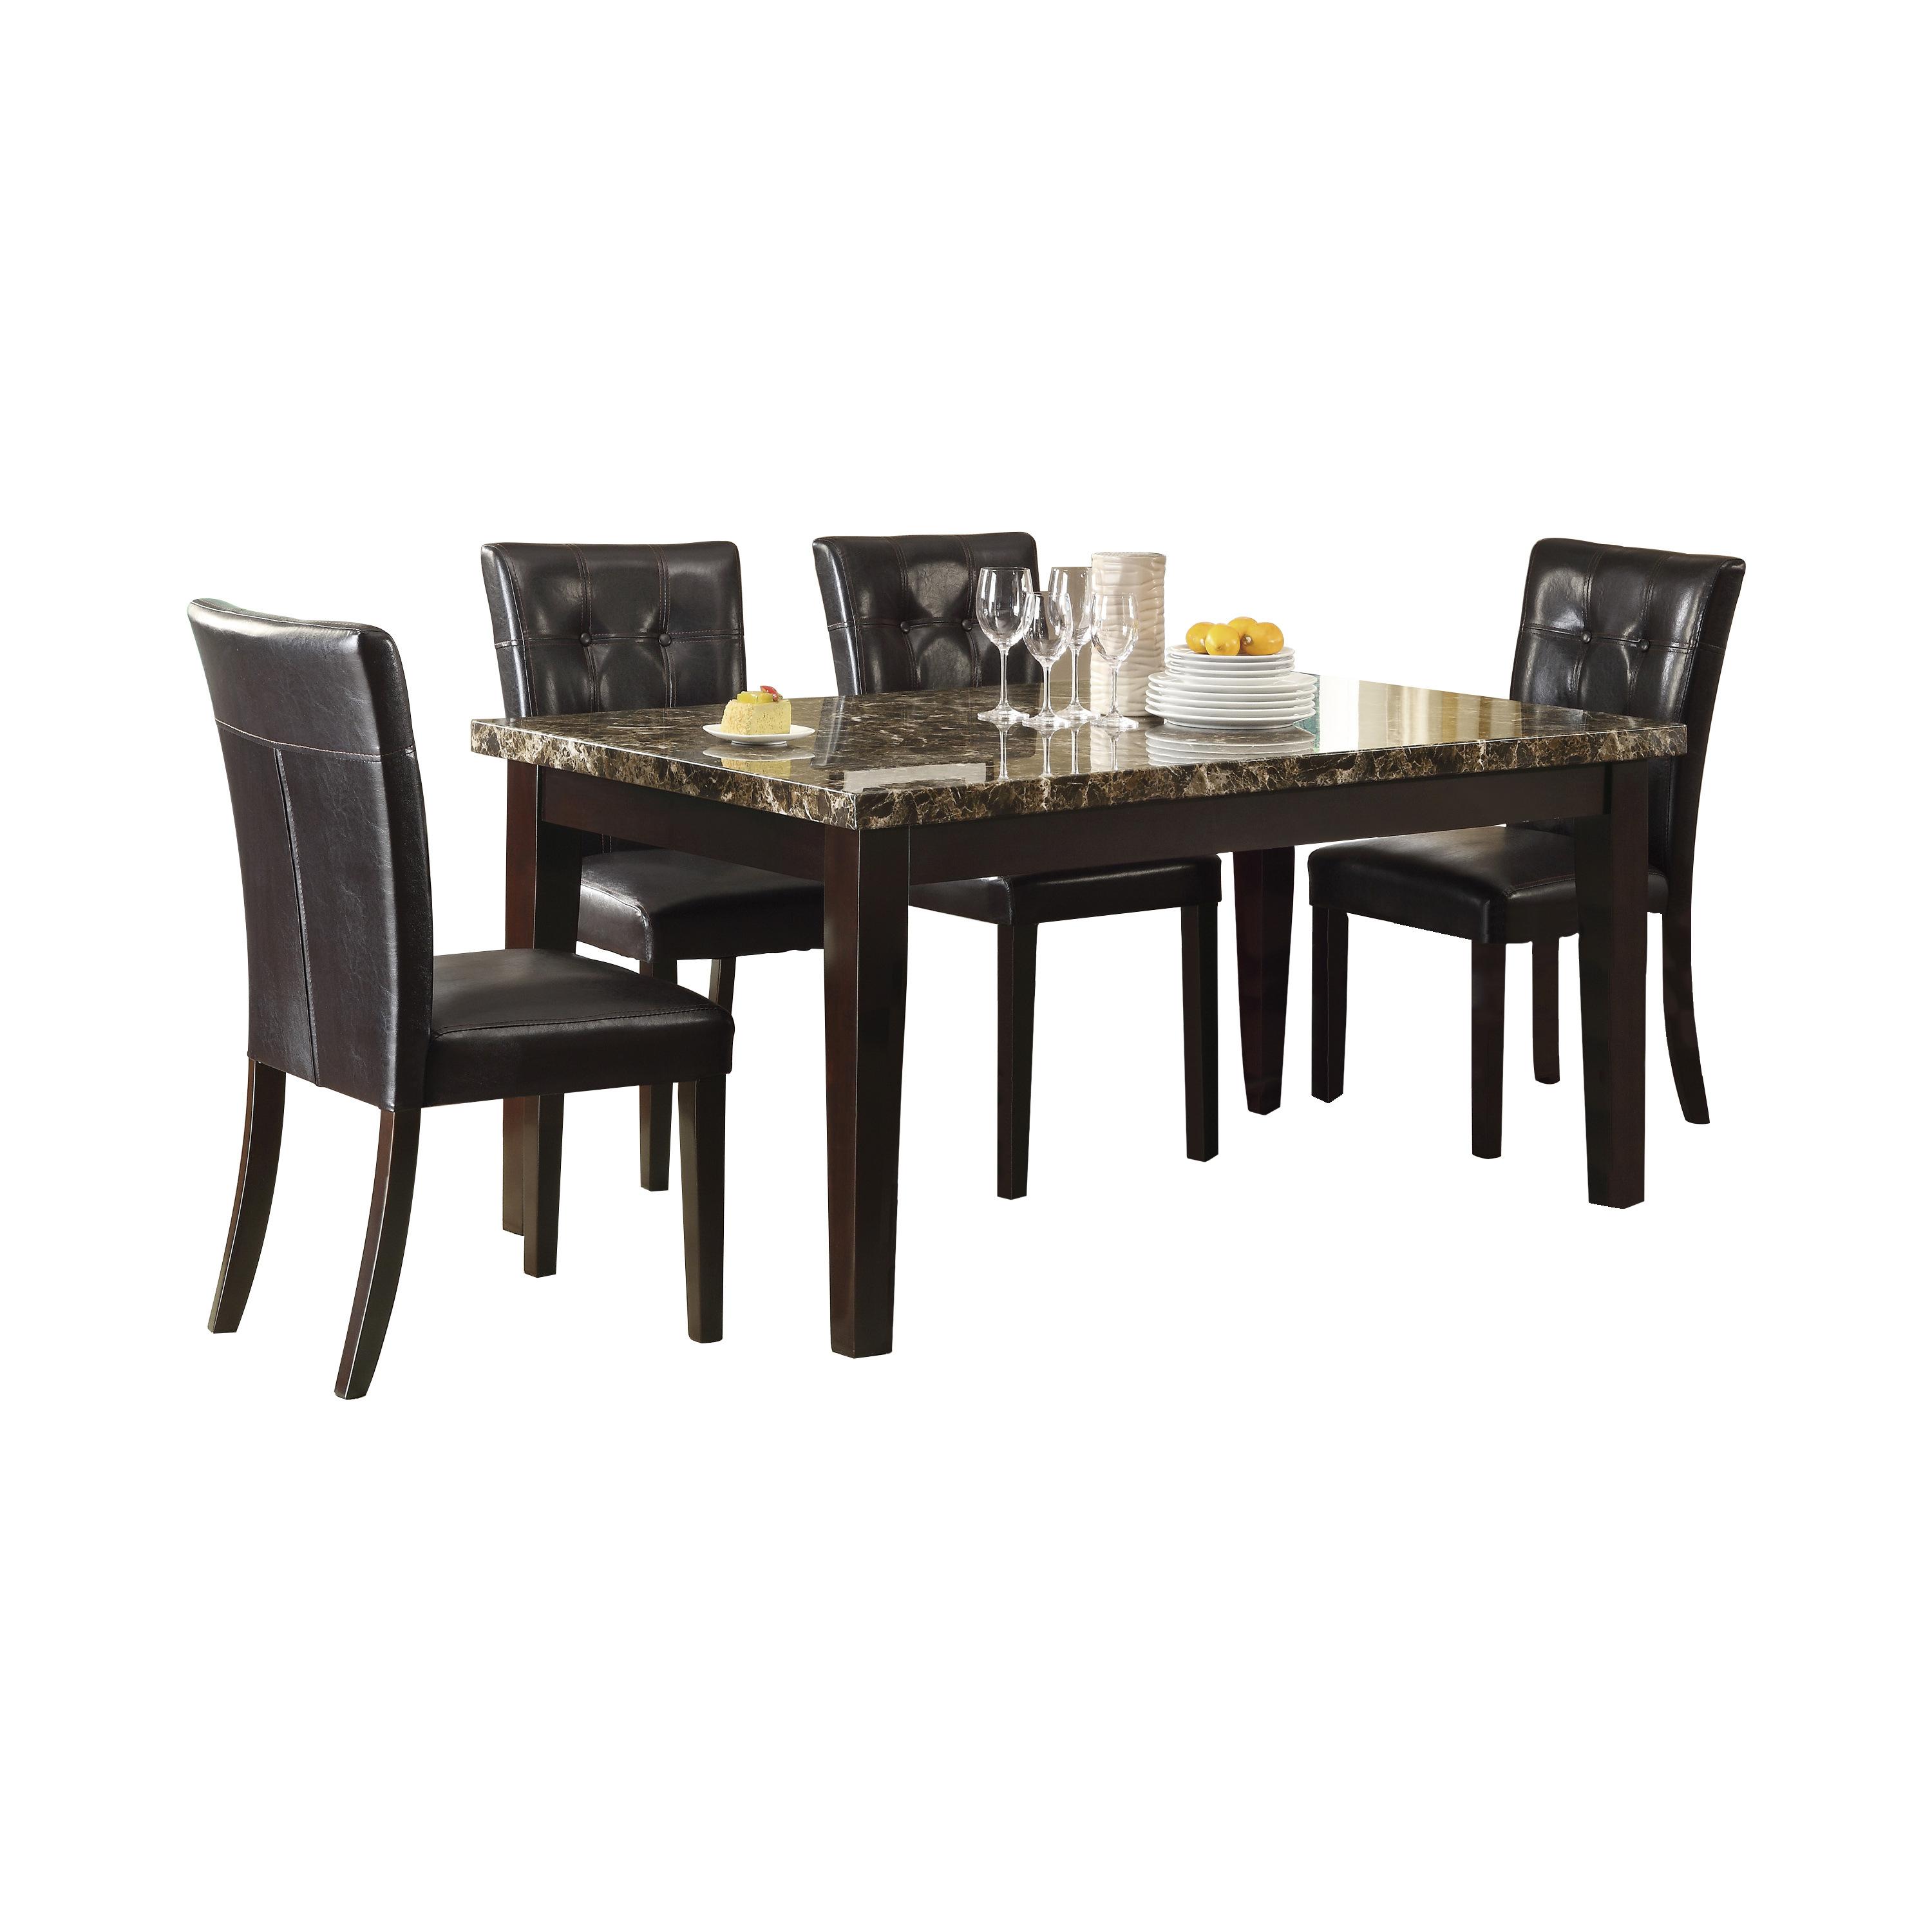 Transitional Dining Room Set 2544-64*5 Teague 2544-64*5 in Espresso Faux Leather